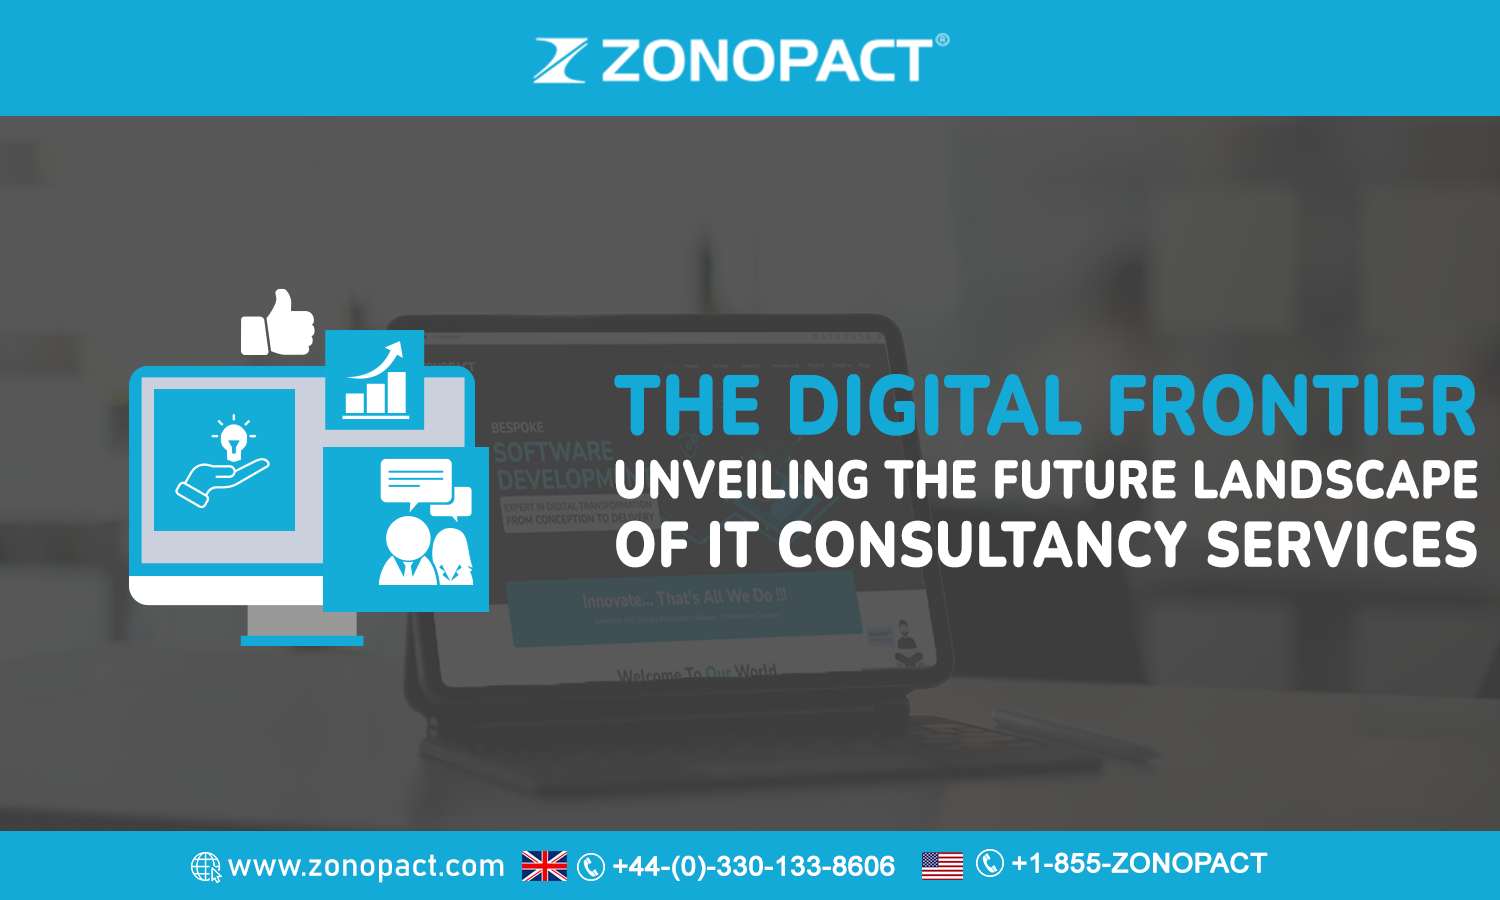 The Digital Frontier Unveiling the Future Landscape of IT Consultancy Services